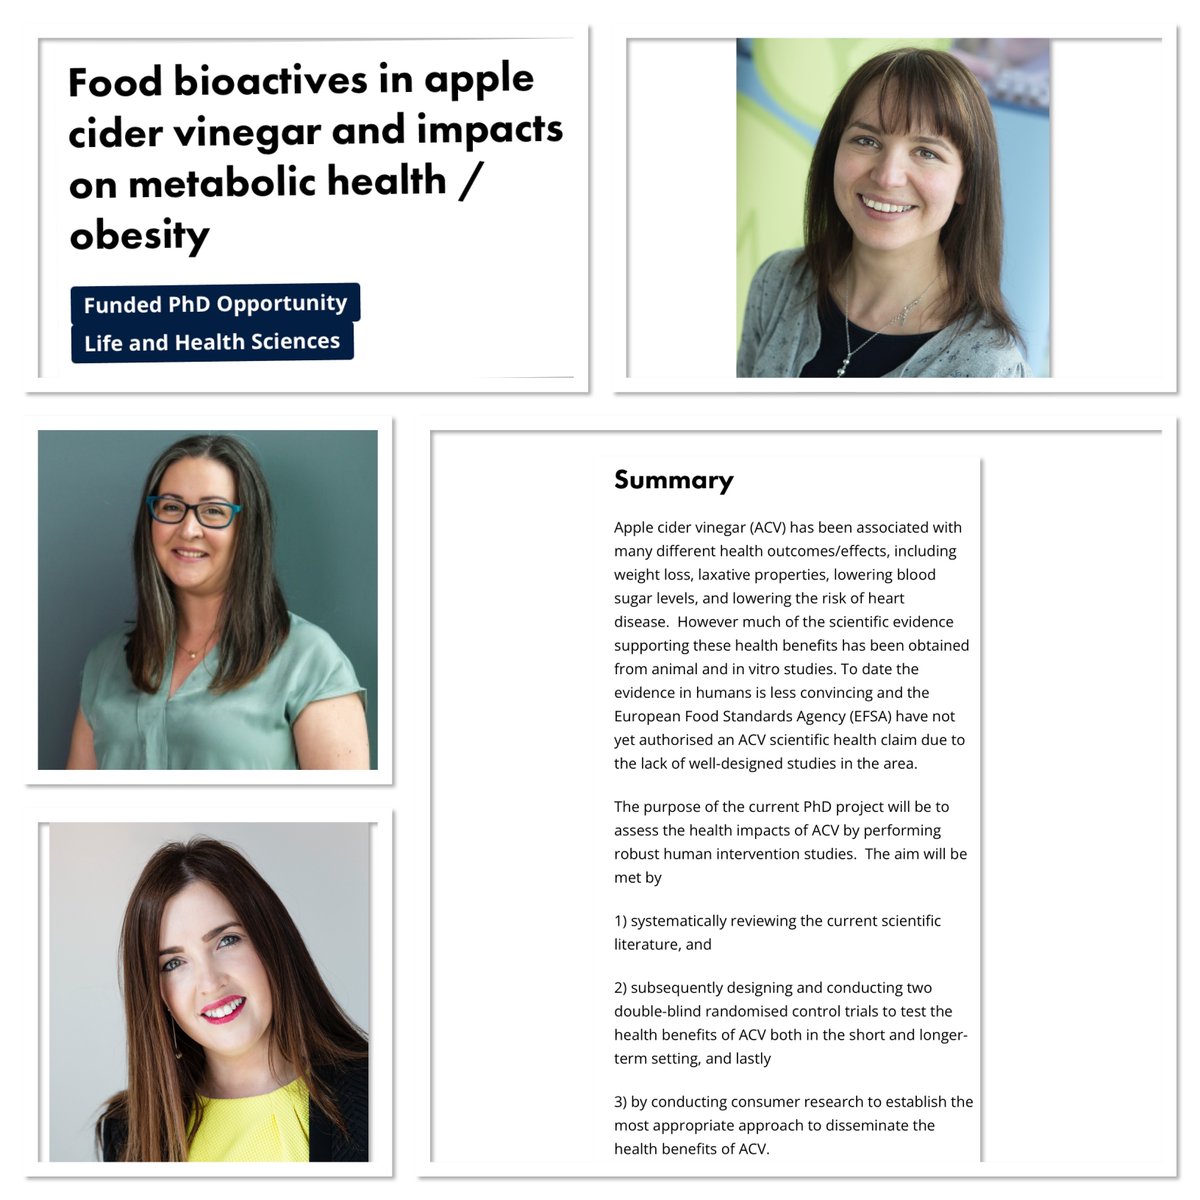 Interested to find out if #food #bioactives in apple cider vinegar can improve markers of metabolic #health & #obesity? Check out this #interdisciplinary #PhD w/ @ruthkprice @DrKirstyP @LynseyHollywood ! Apply by 27Feb #NICHEphd #NICHEagri  ulster.ac.uk/doctoralcolleg…